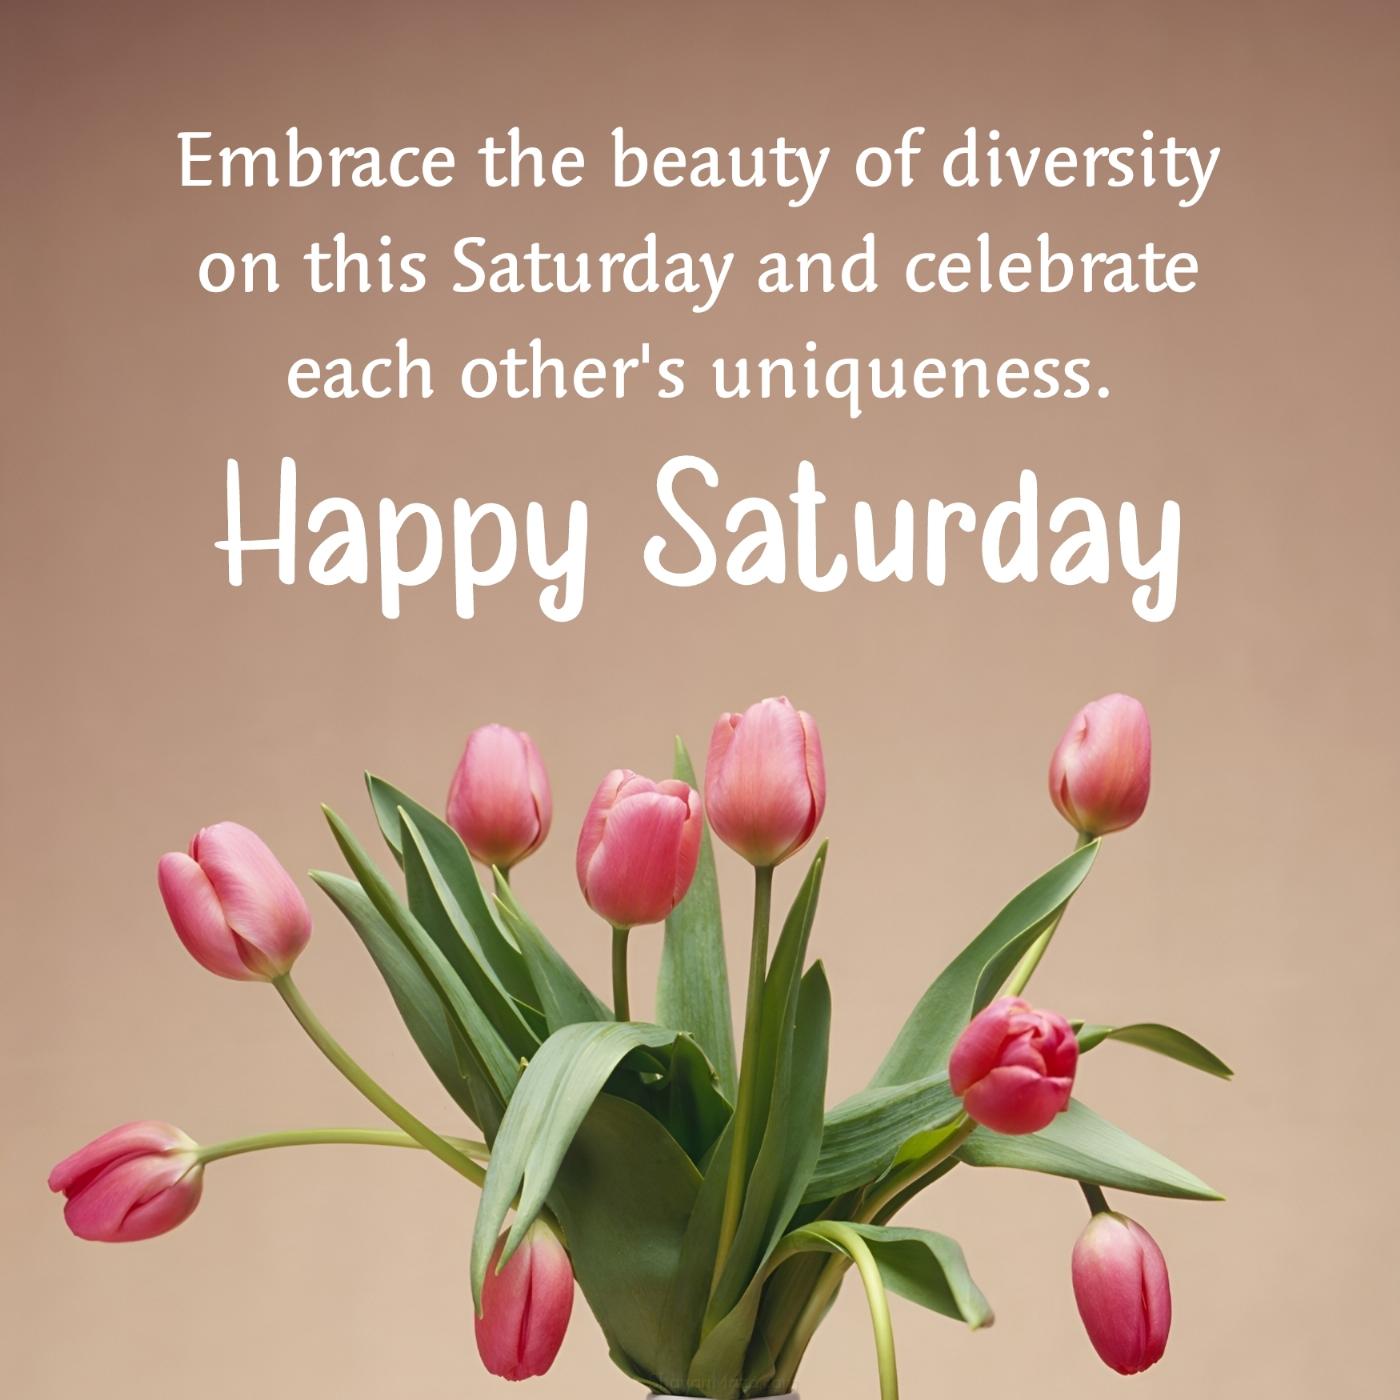 Embrace the beauty of diversity on this Saturday